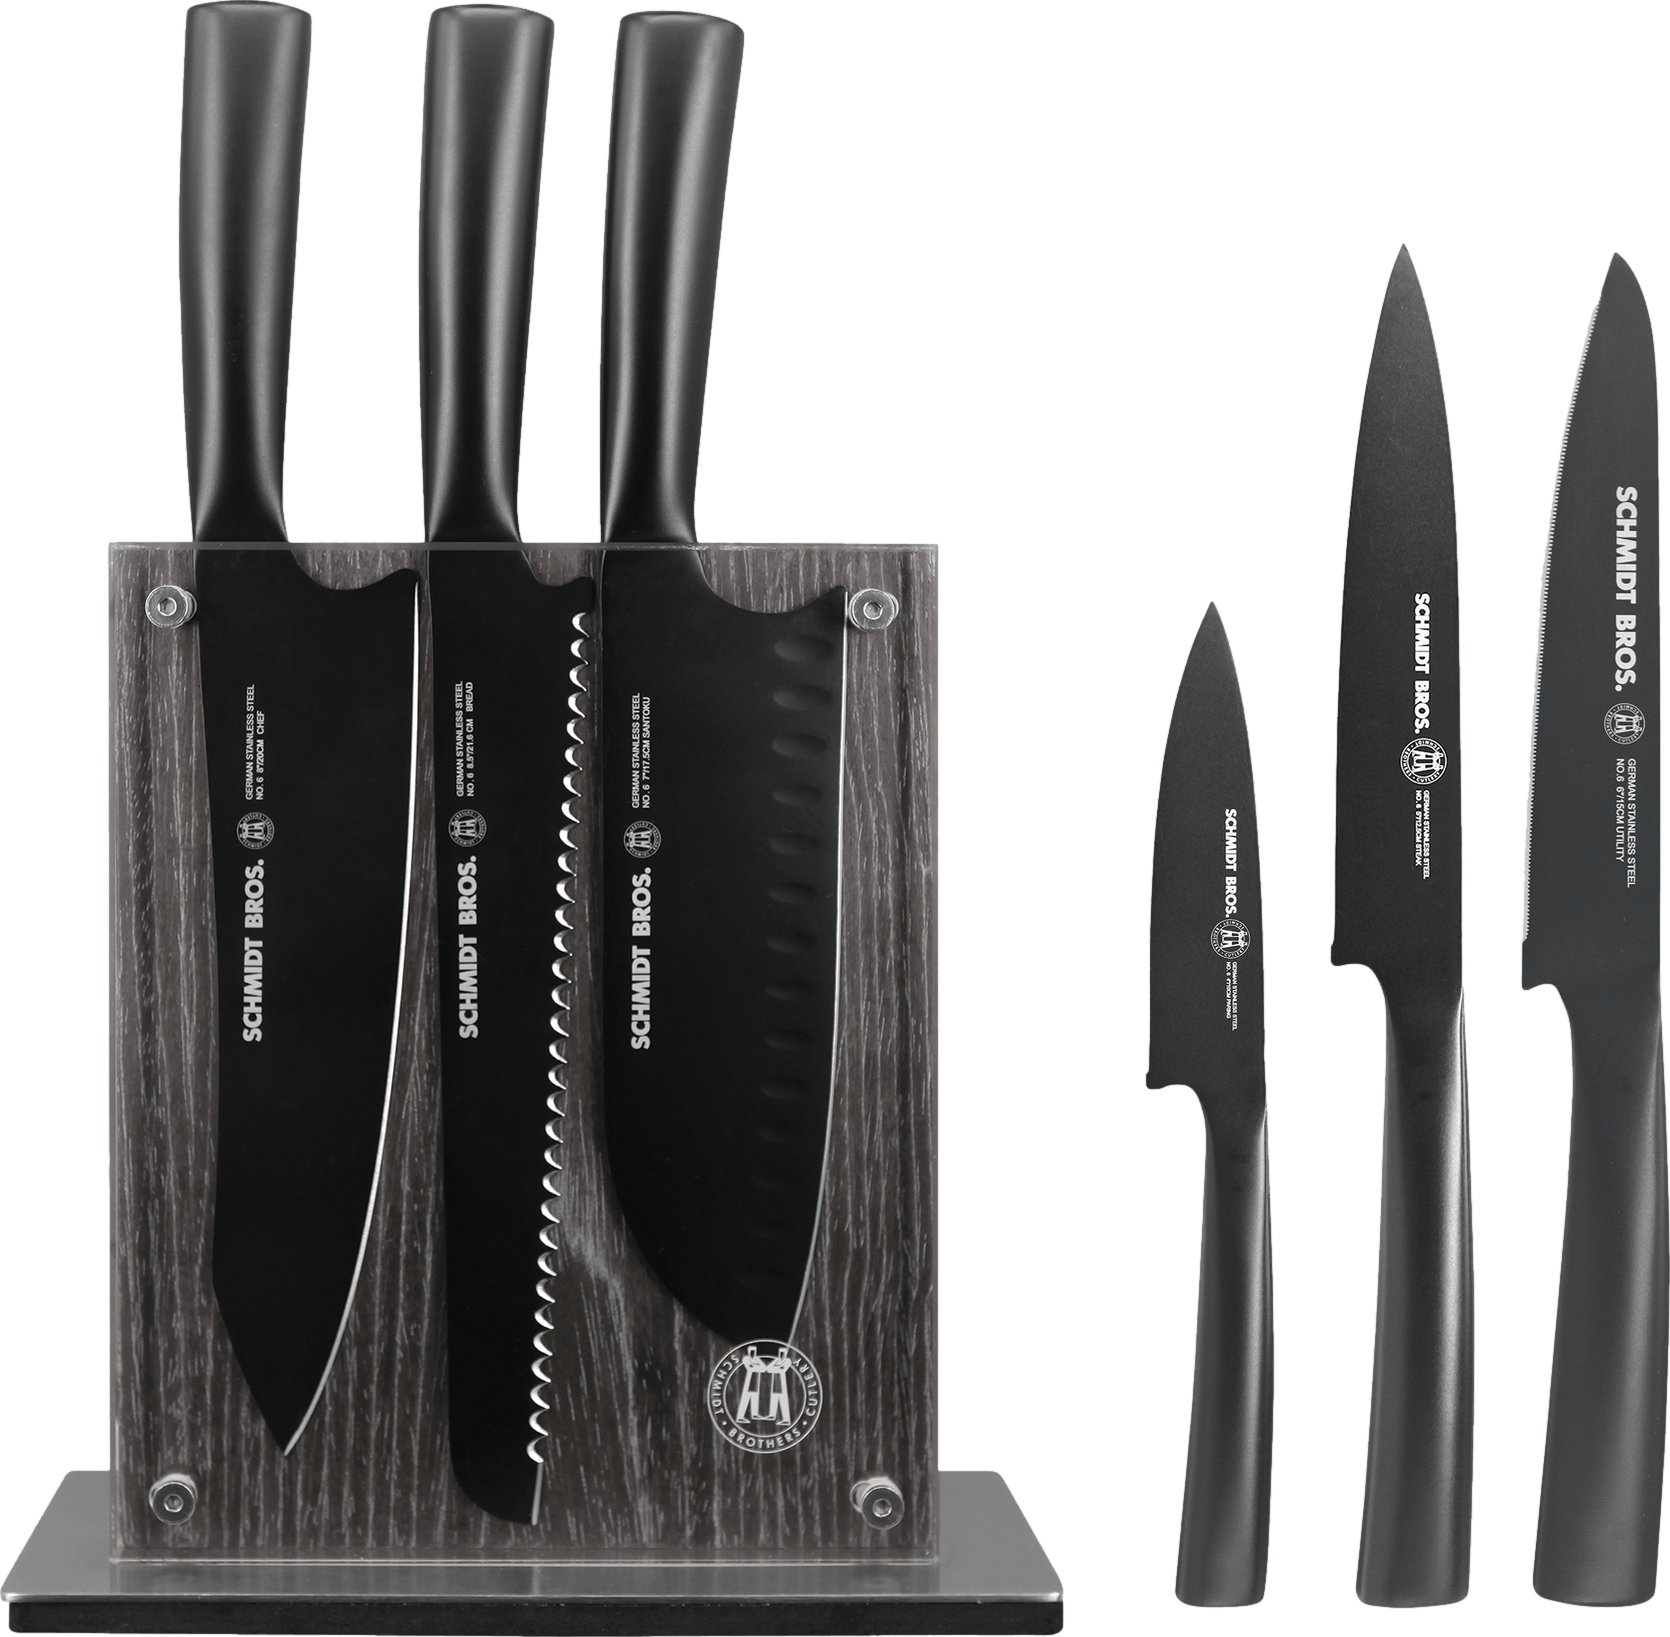 3 Best Kitchen Knives Every Chef Needs in Their Arsenal – Schmidt Bros.